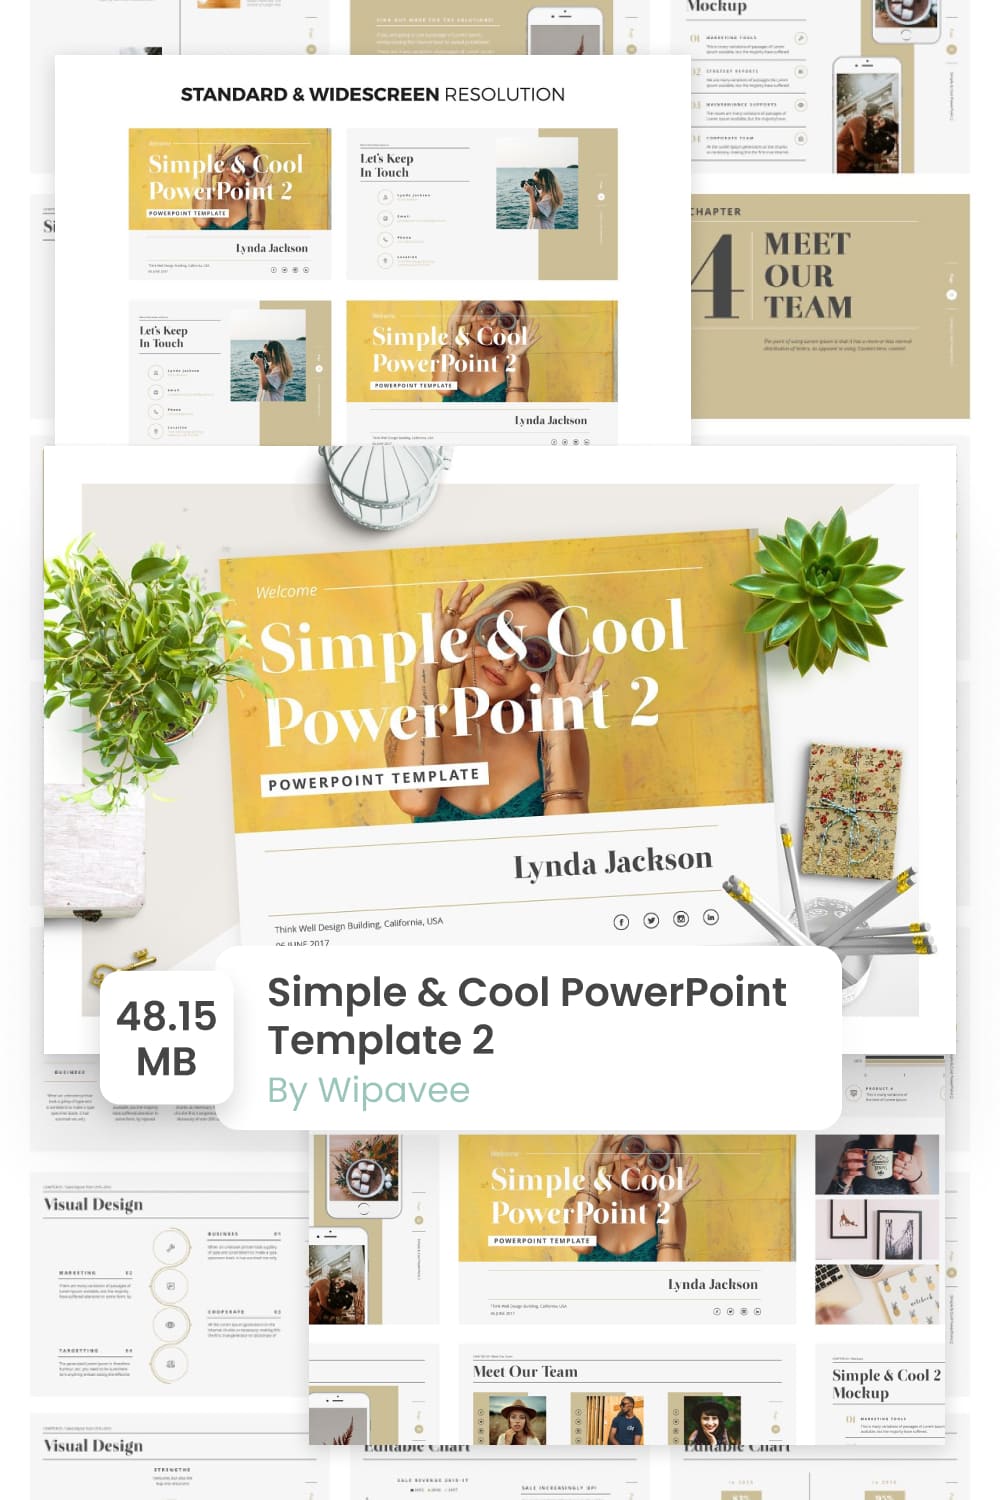 Simple & Cool PowerPoint Template 2 by MasterBundles Pinterest Collage Image.